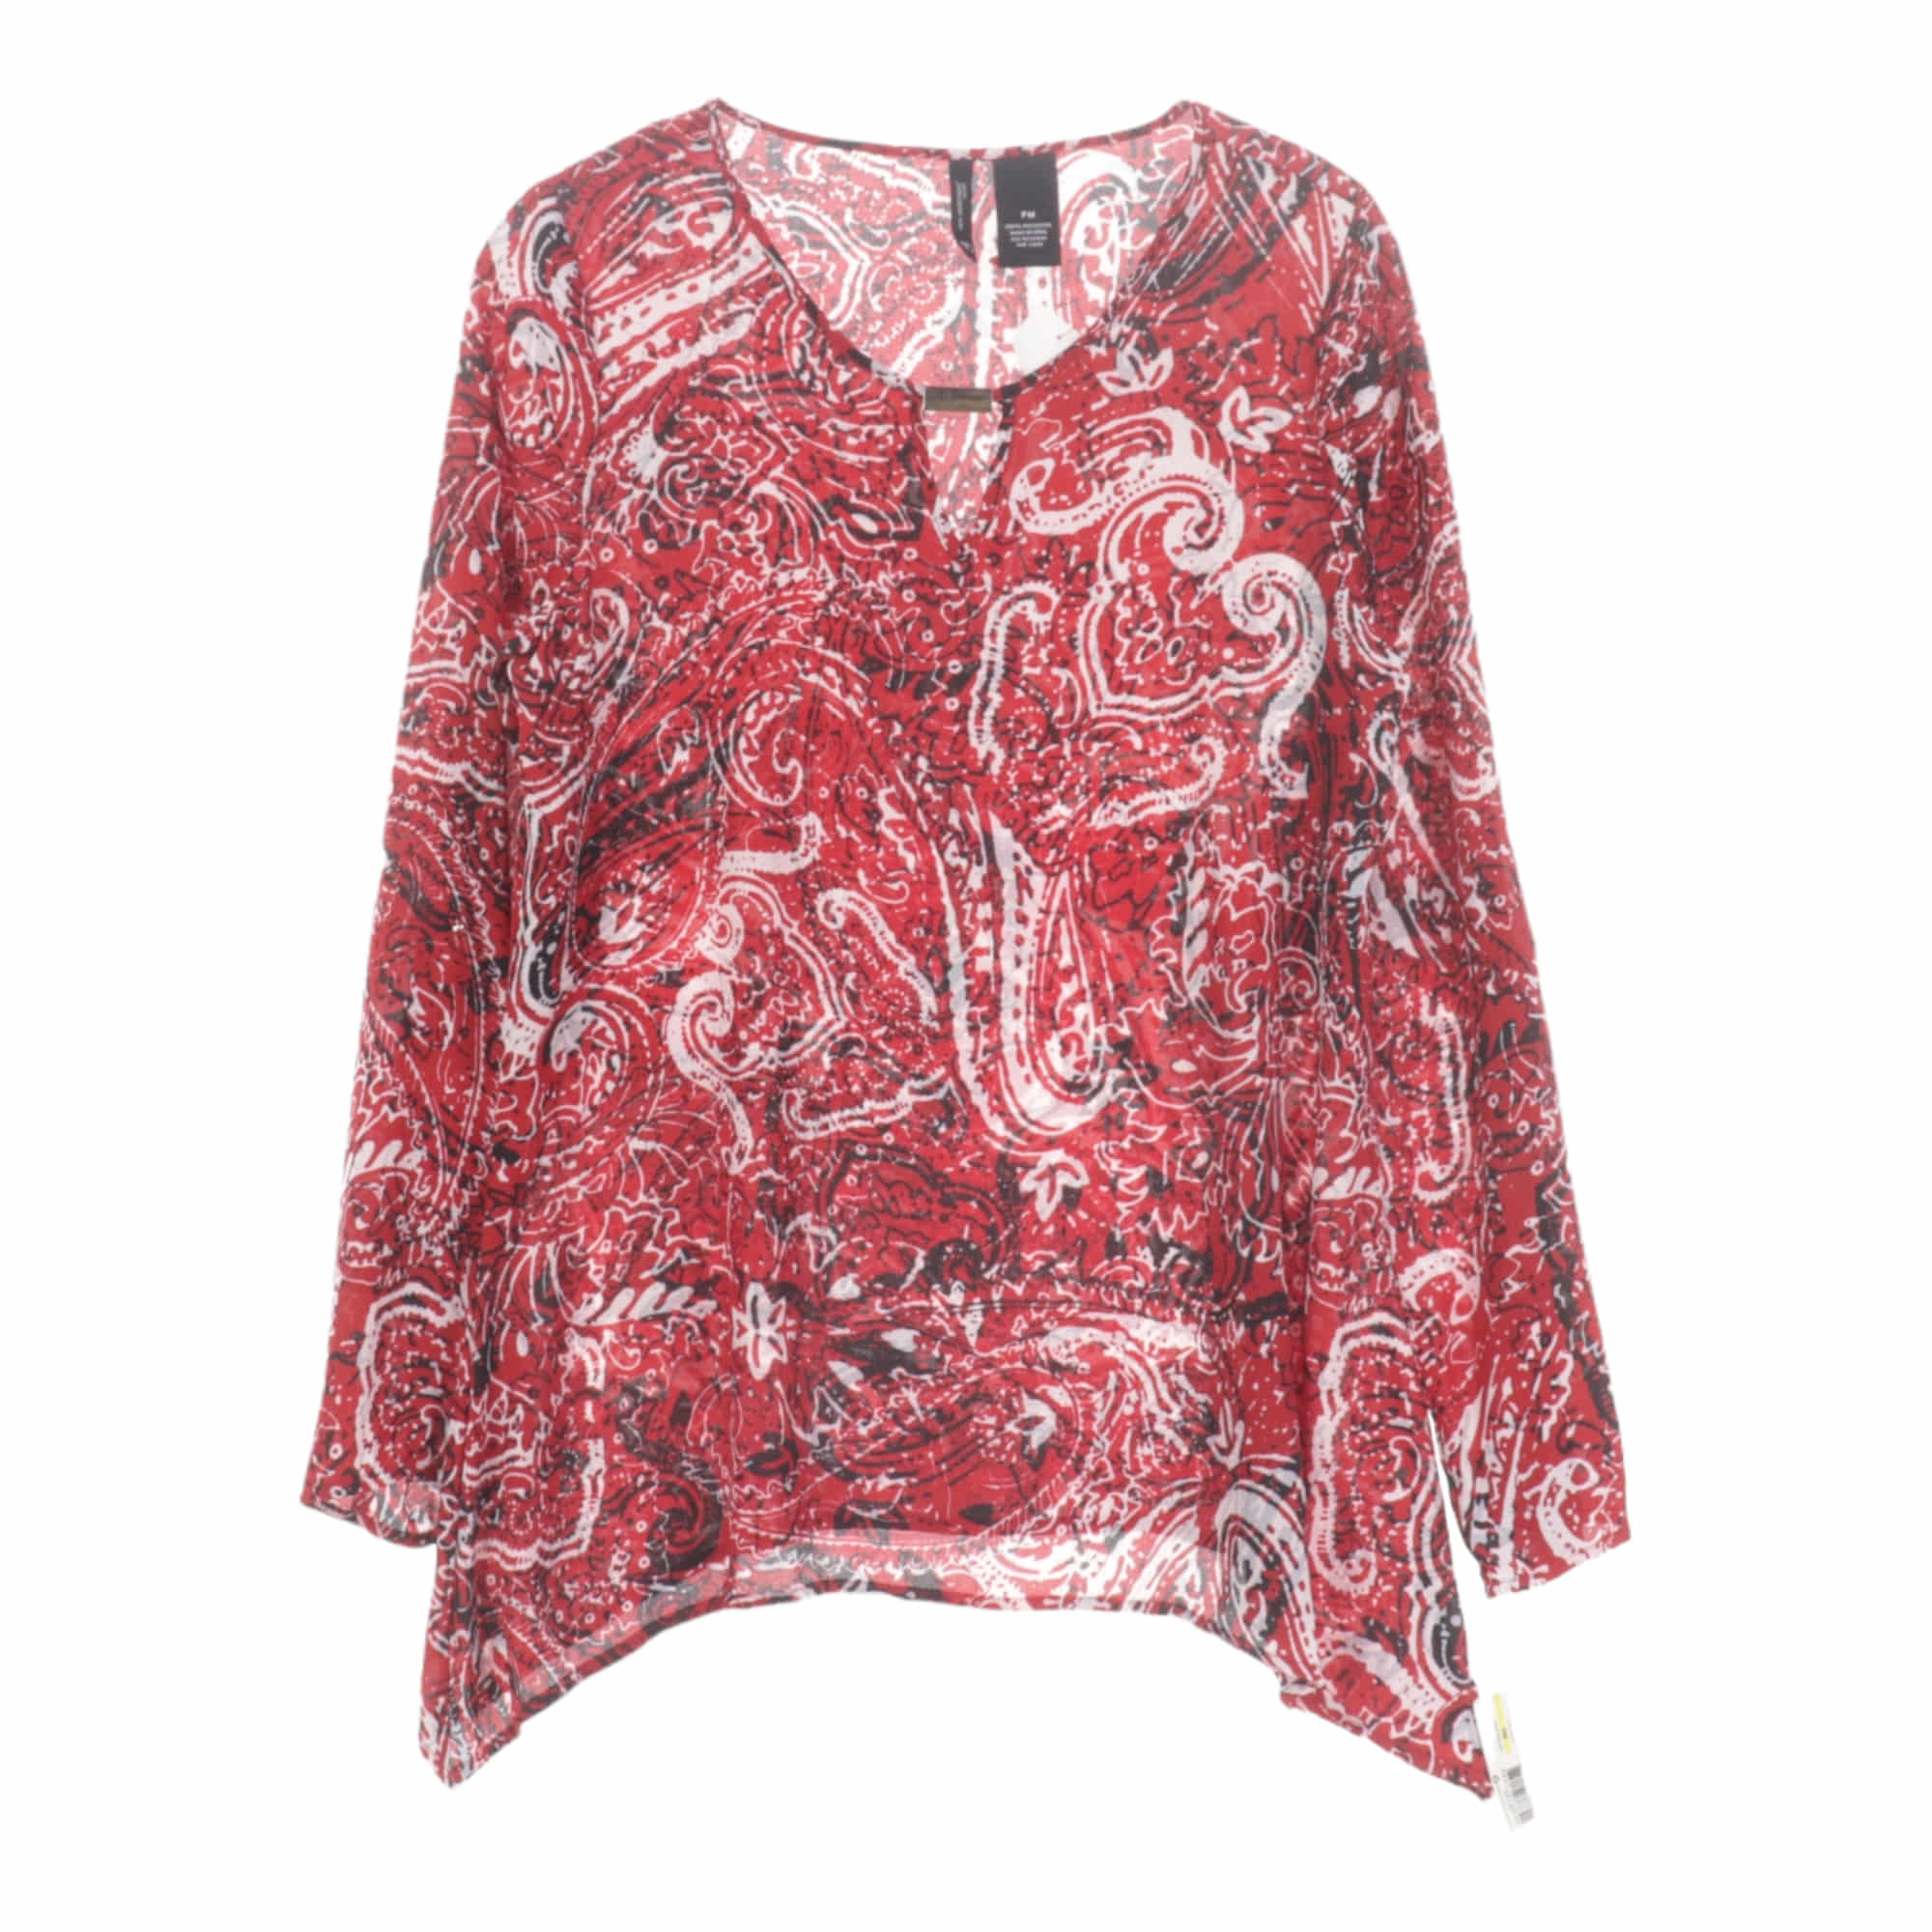 New Directions,Blouse